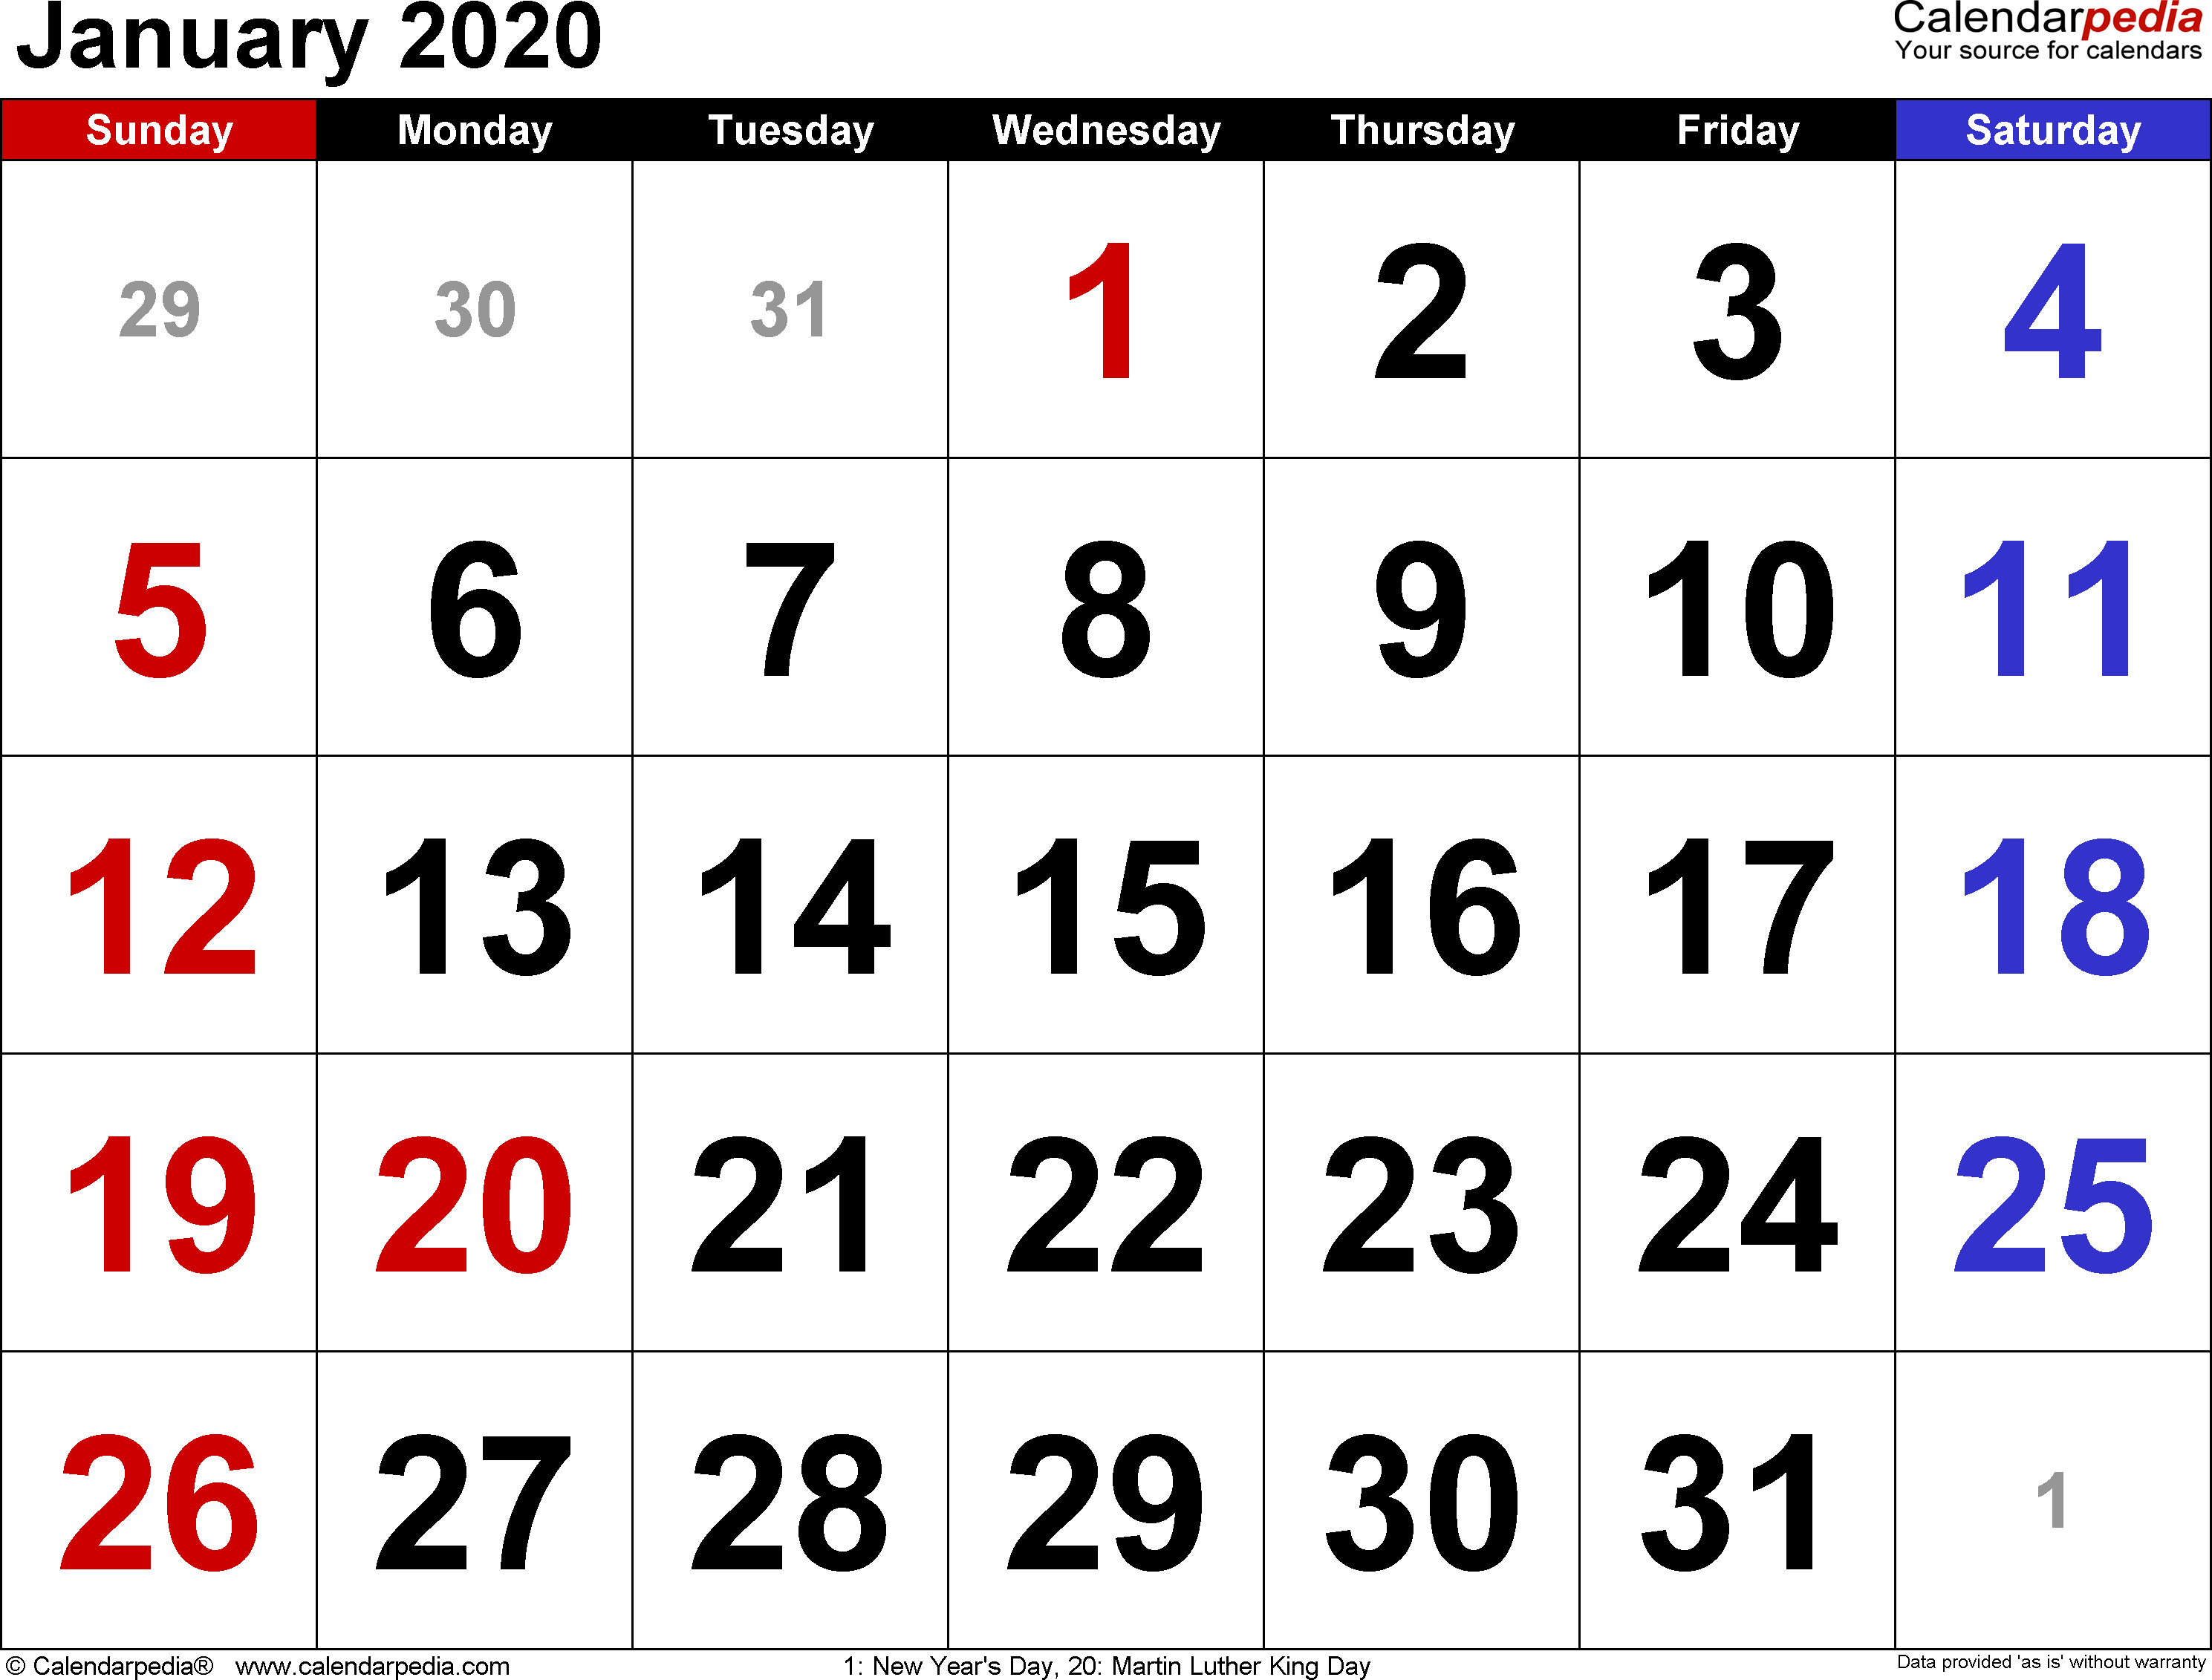 January 2020 Calendars for Word, Excel & PDF